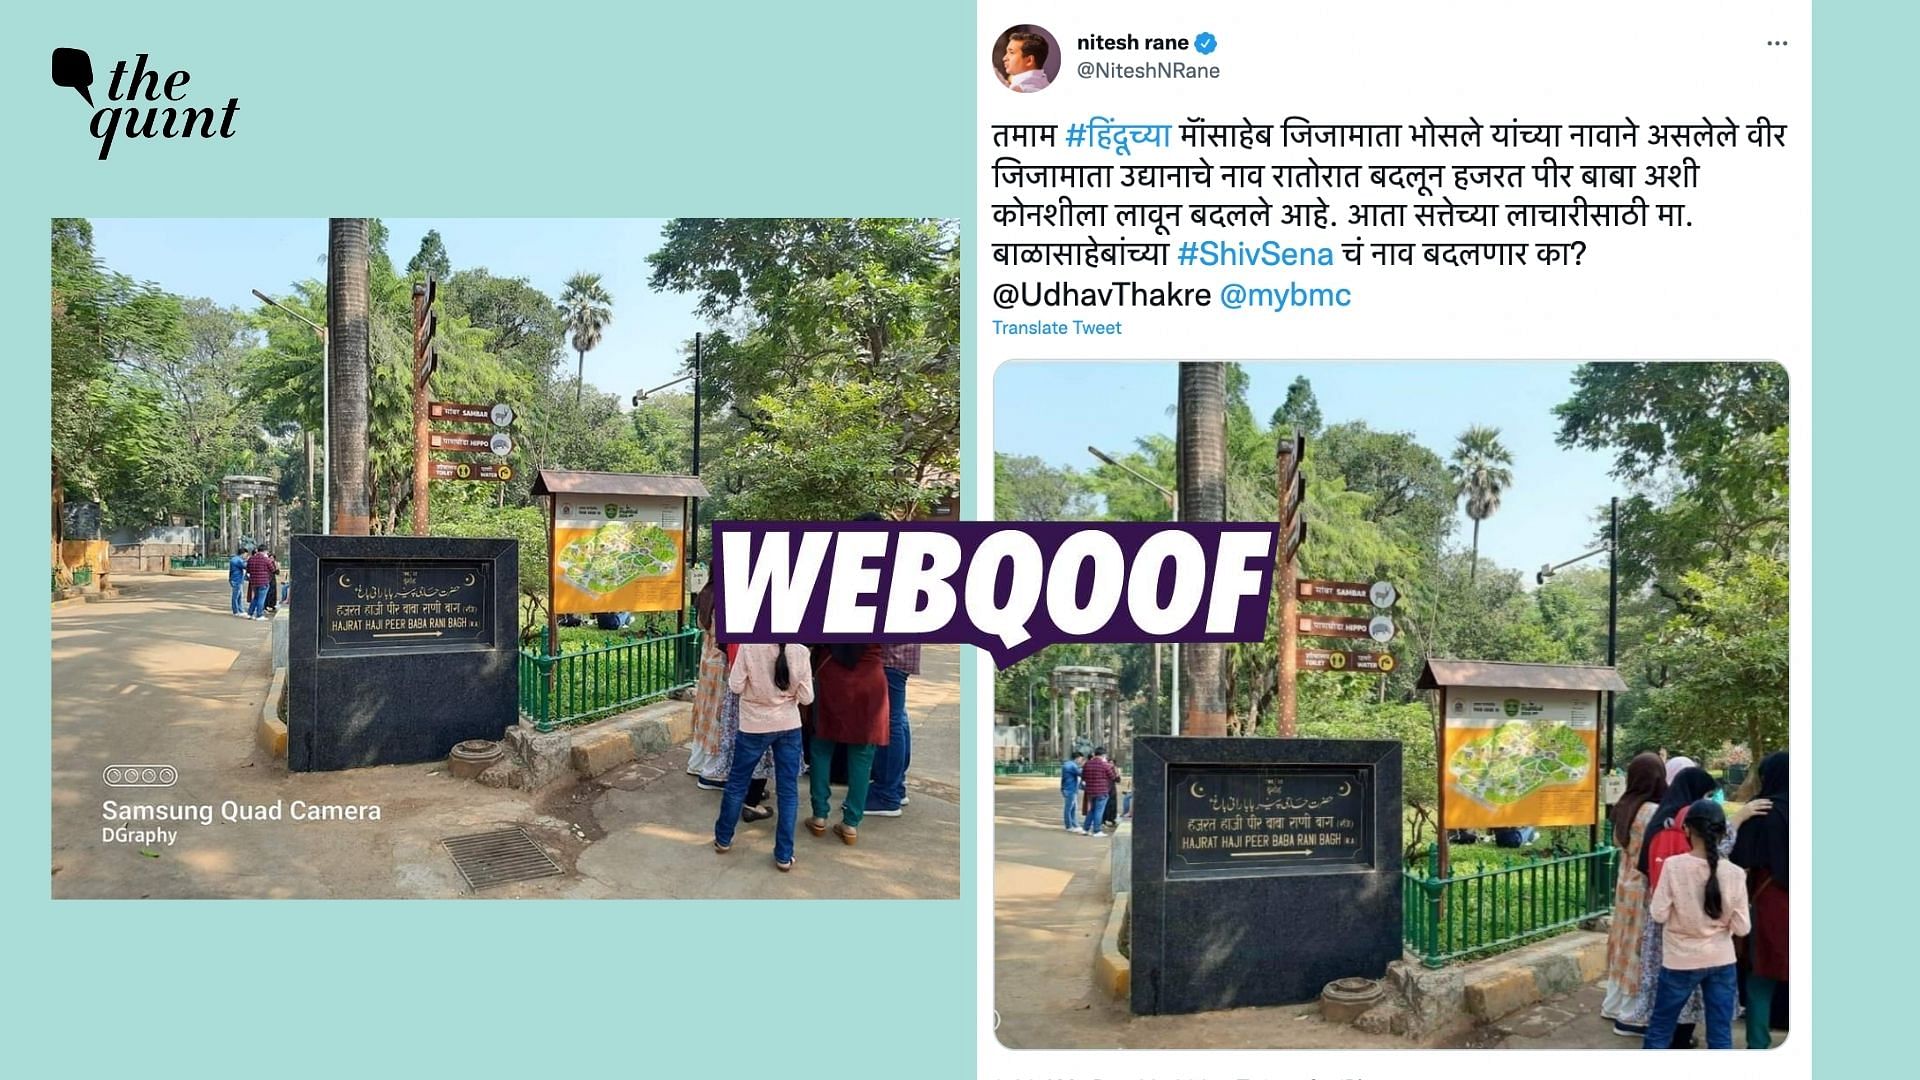 <div class="paragraphs"><p>The zoo's Twitter account clarified that the pic showed a directional board and that the zoo's name had not changed.</p></div>